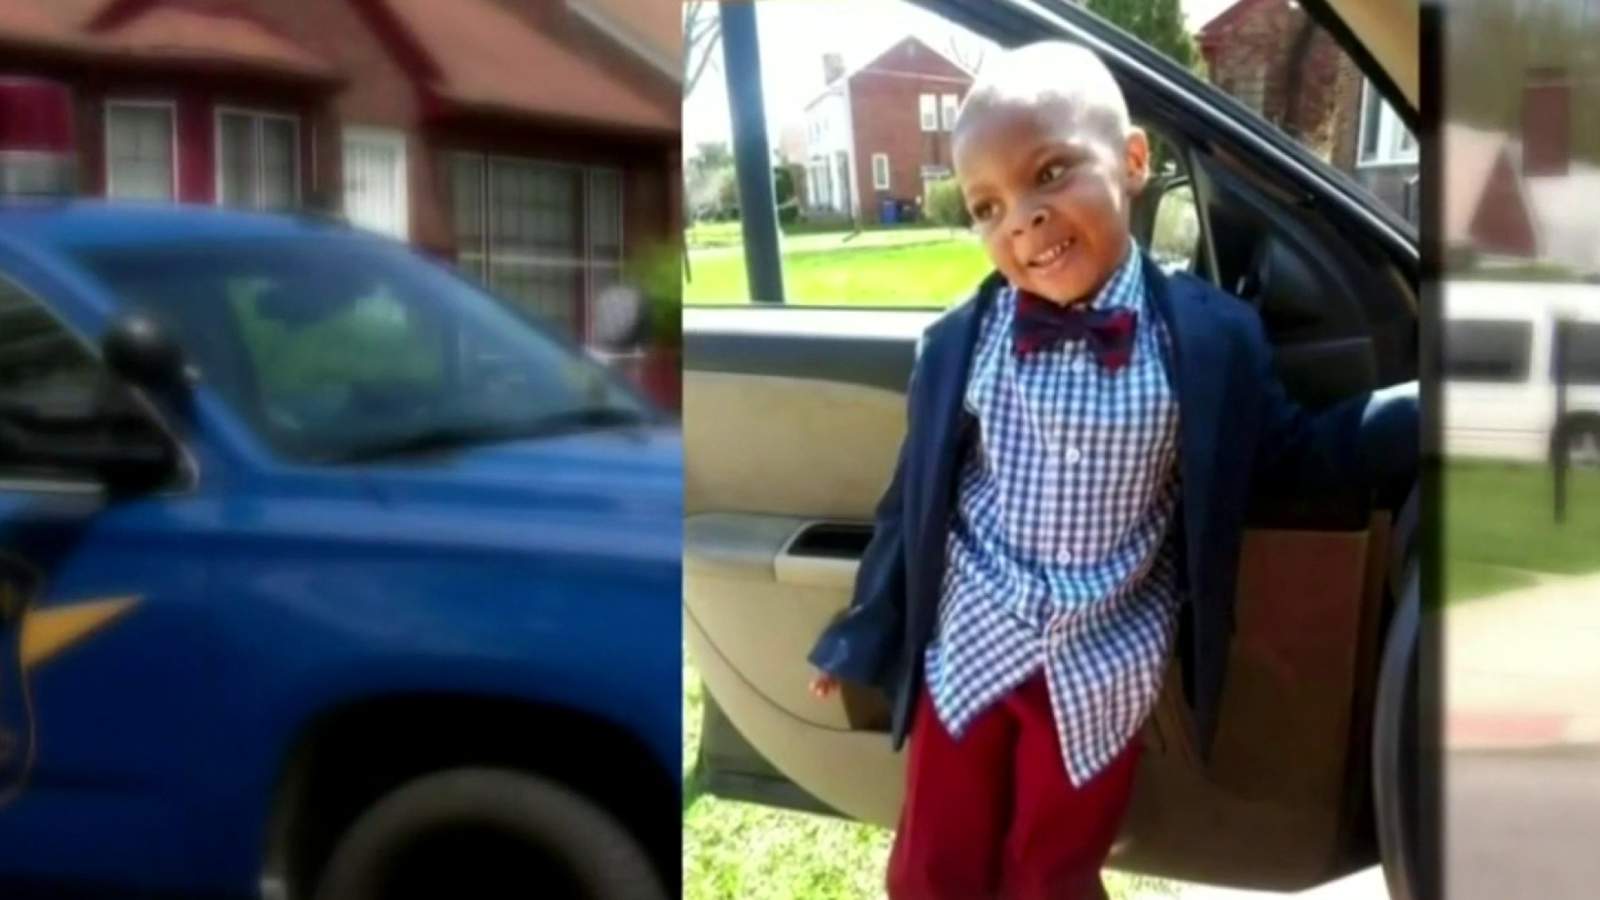 New reward offered in fatal shooting of 4-year-old on Detroits west side